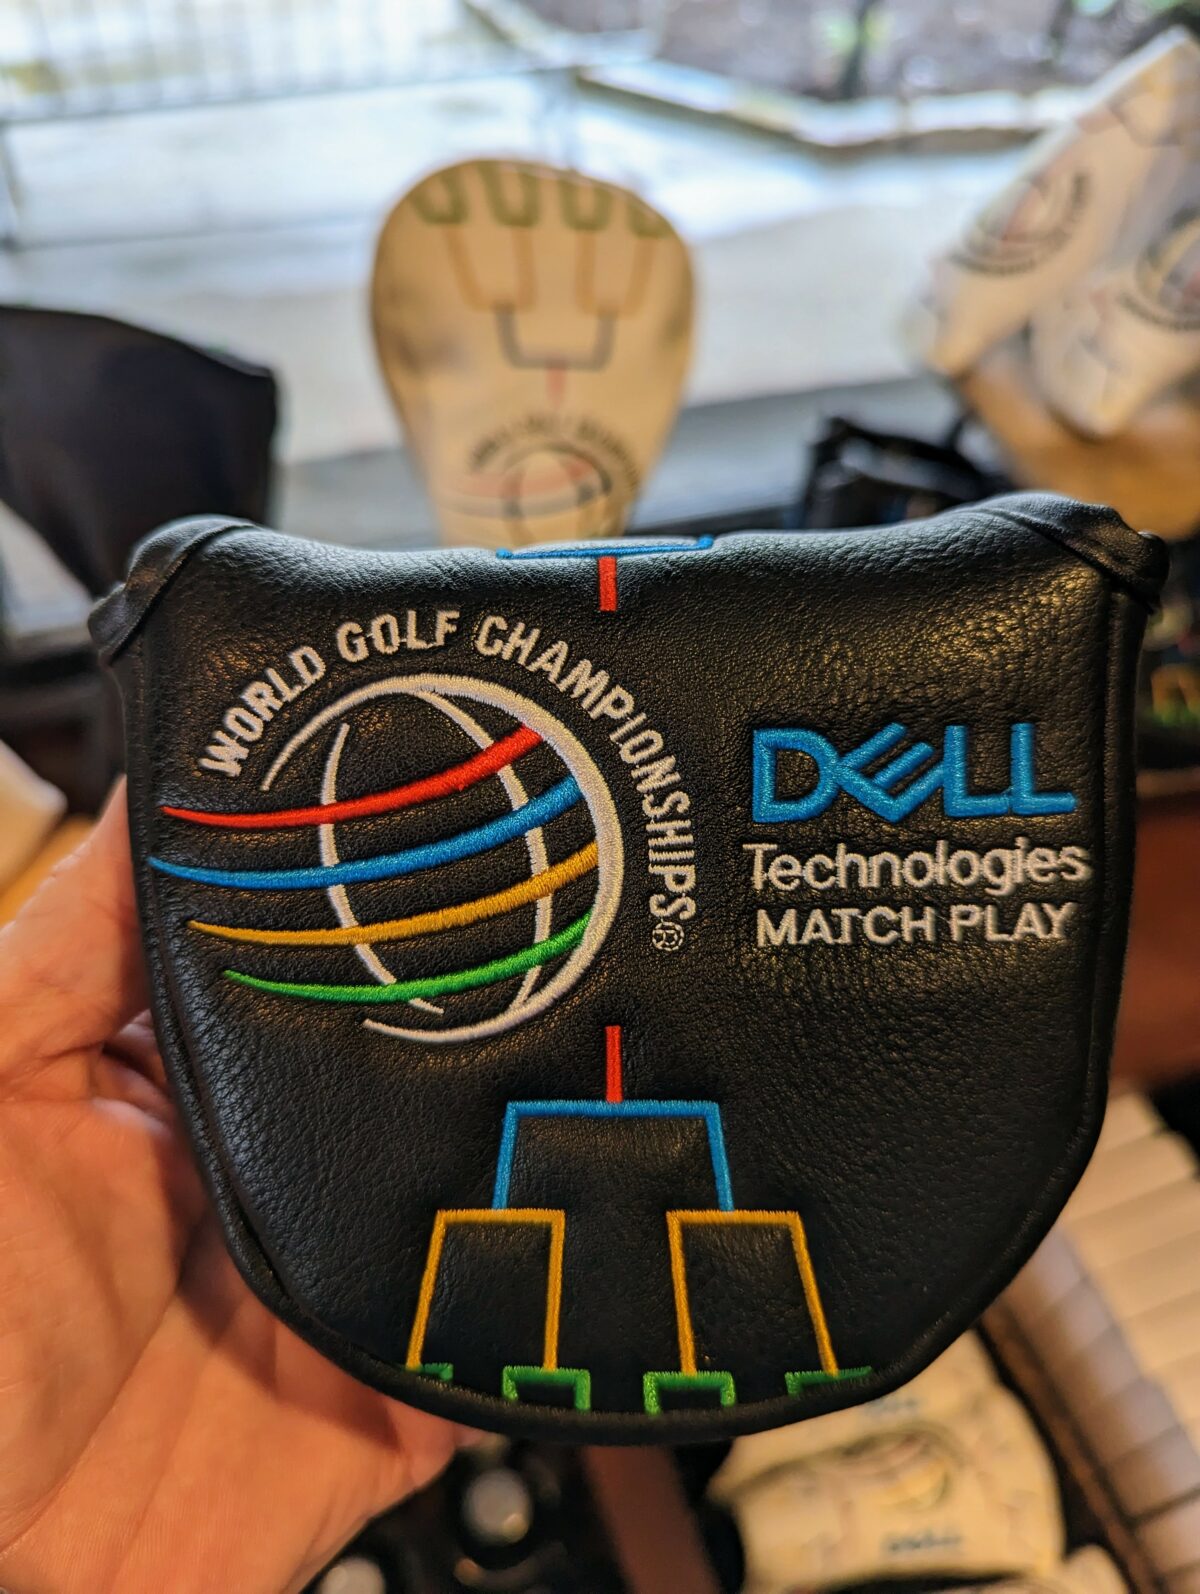 These WGC-Dell Technologies Match Play merchandise items will soon be collectibles